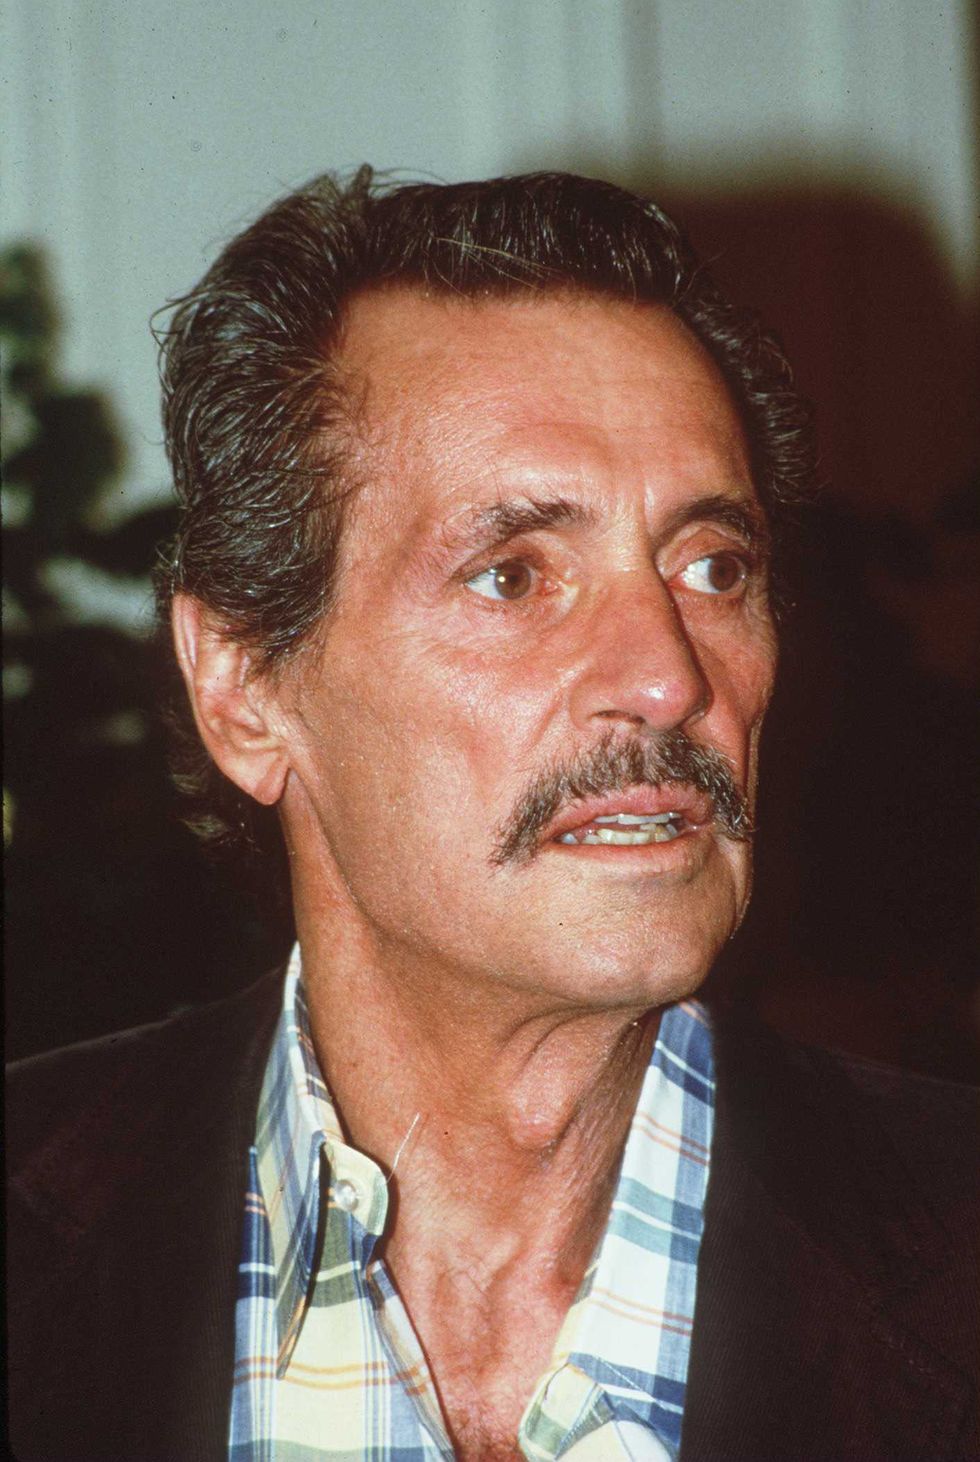 carmel, ca   1985 rock hudson, a few months before he died of aids, at a press conference , 1985, carmel, california photo by paul harrisgetty images